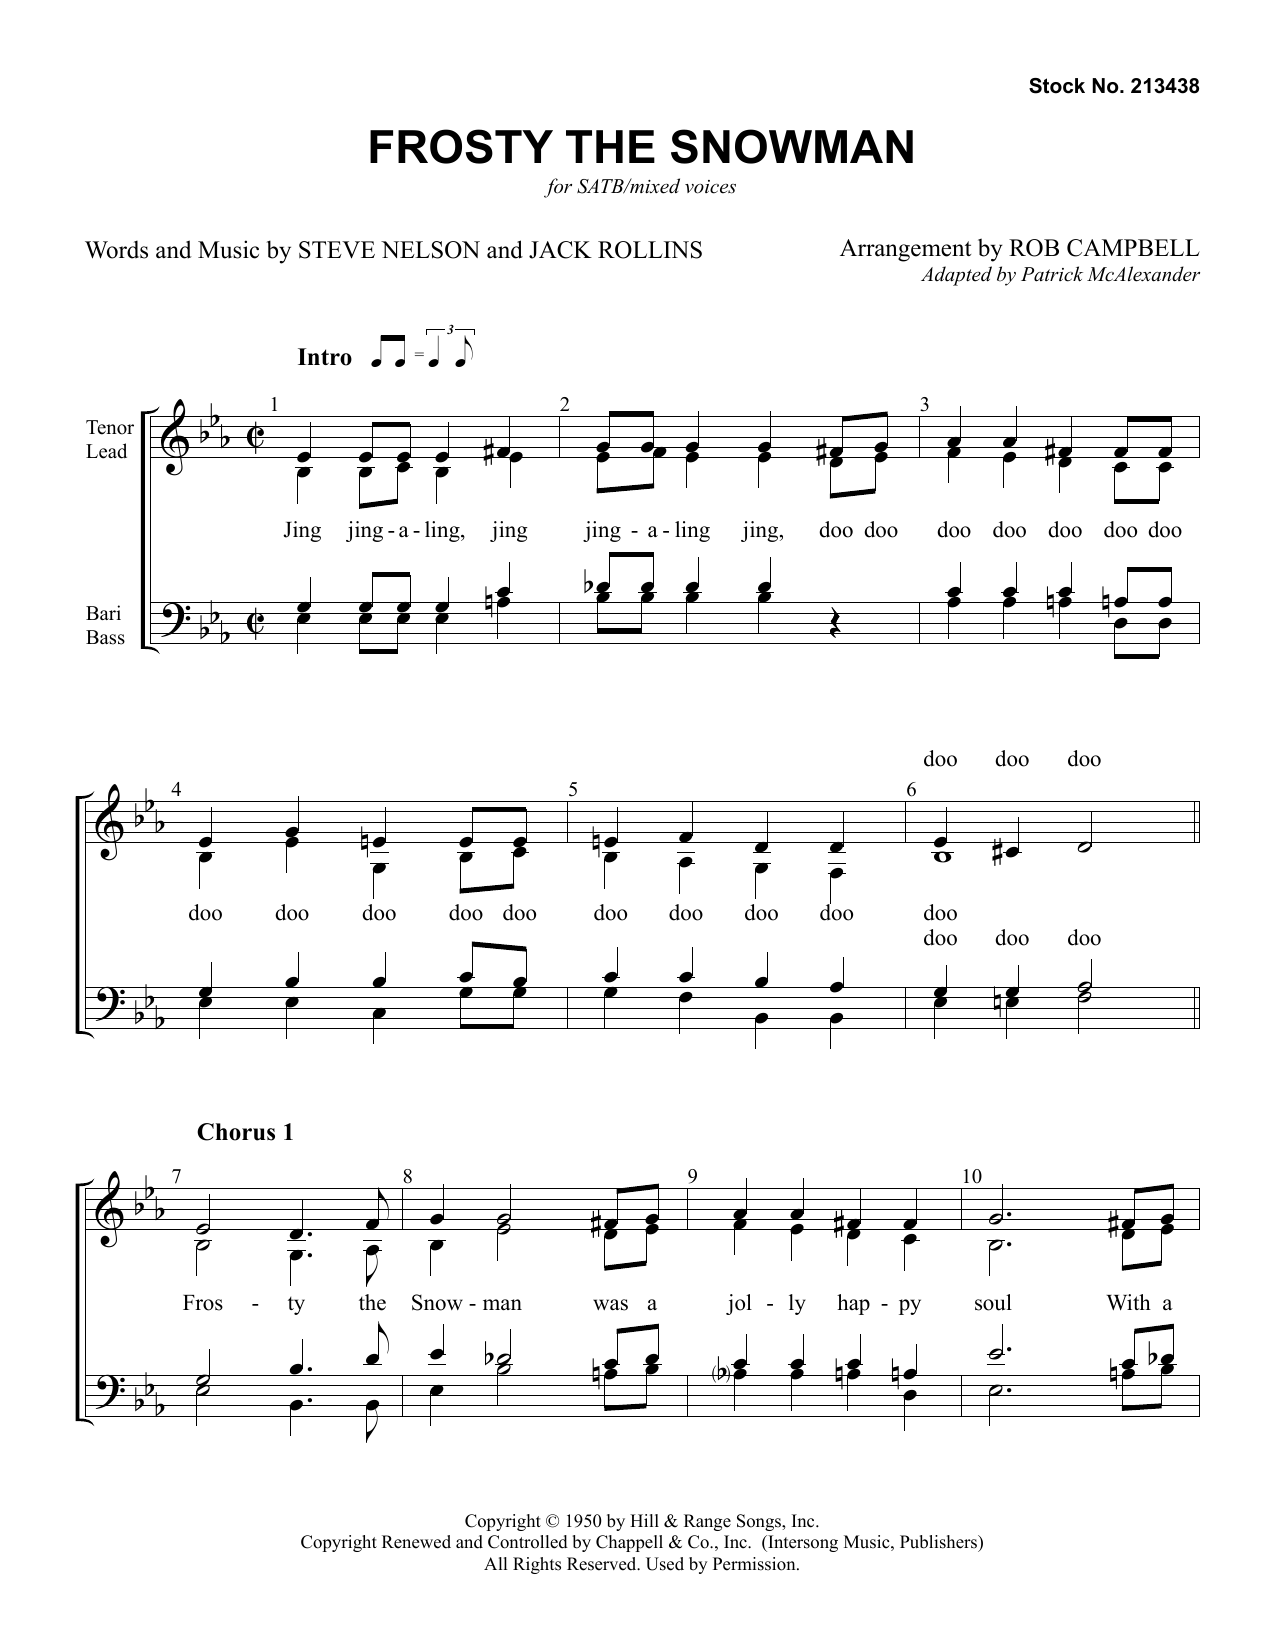 Download Steve Nelson & Jack Rollins Frosty The Snowman (arr. Rob Campbell) Sheet Music